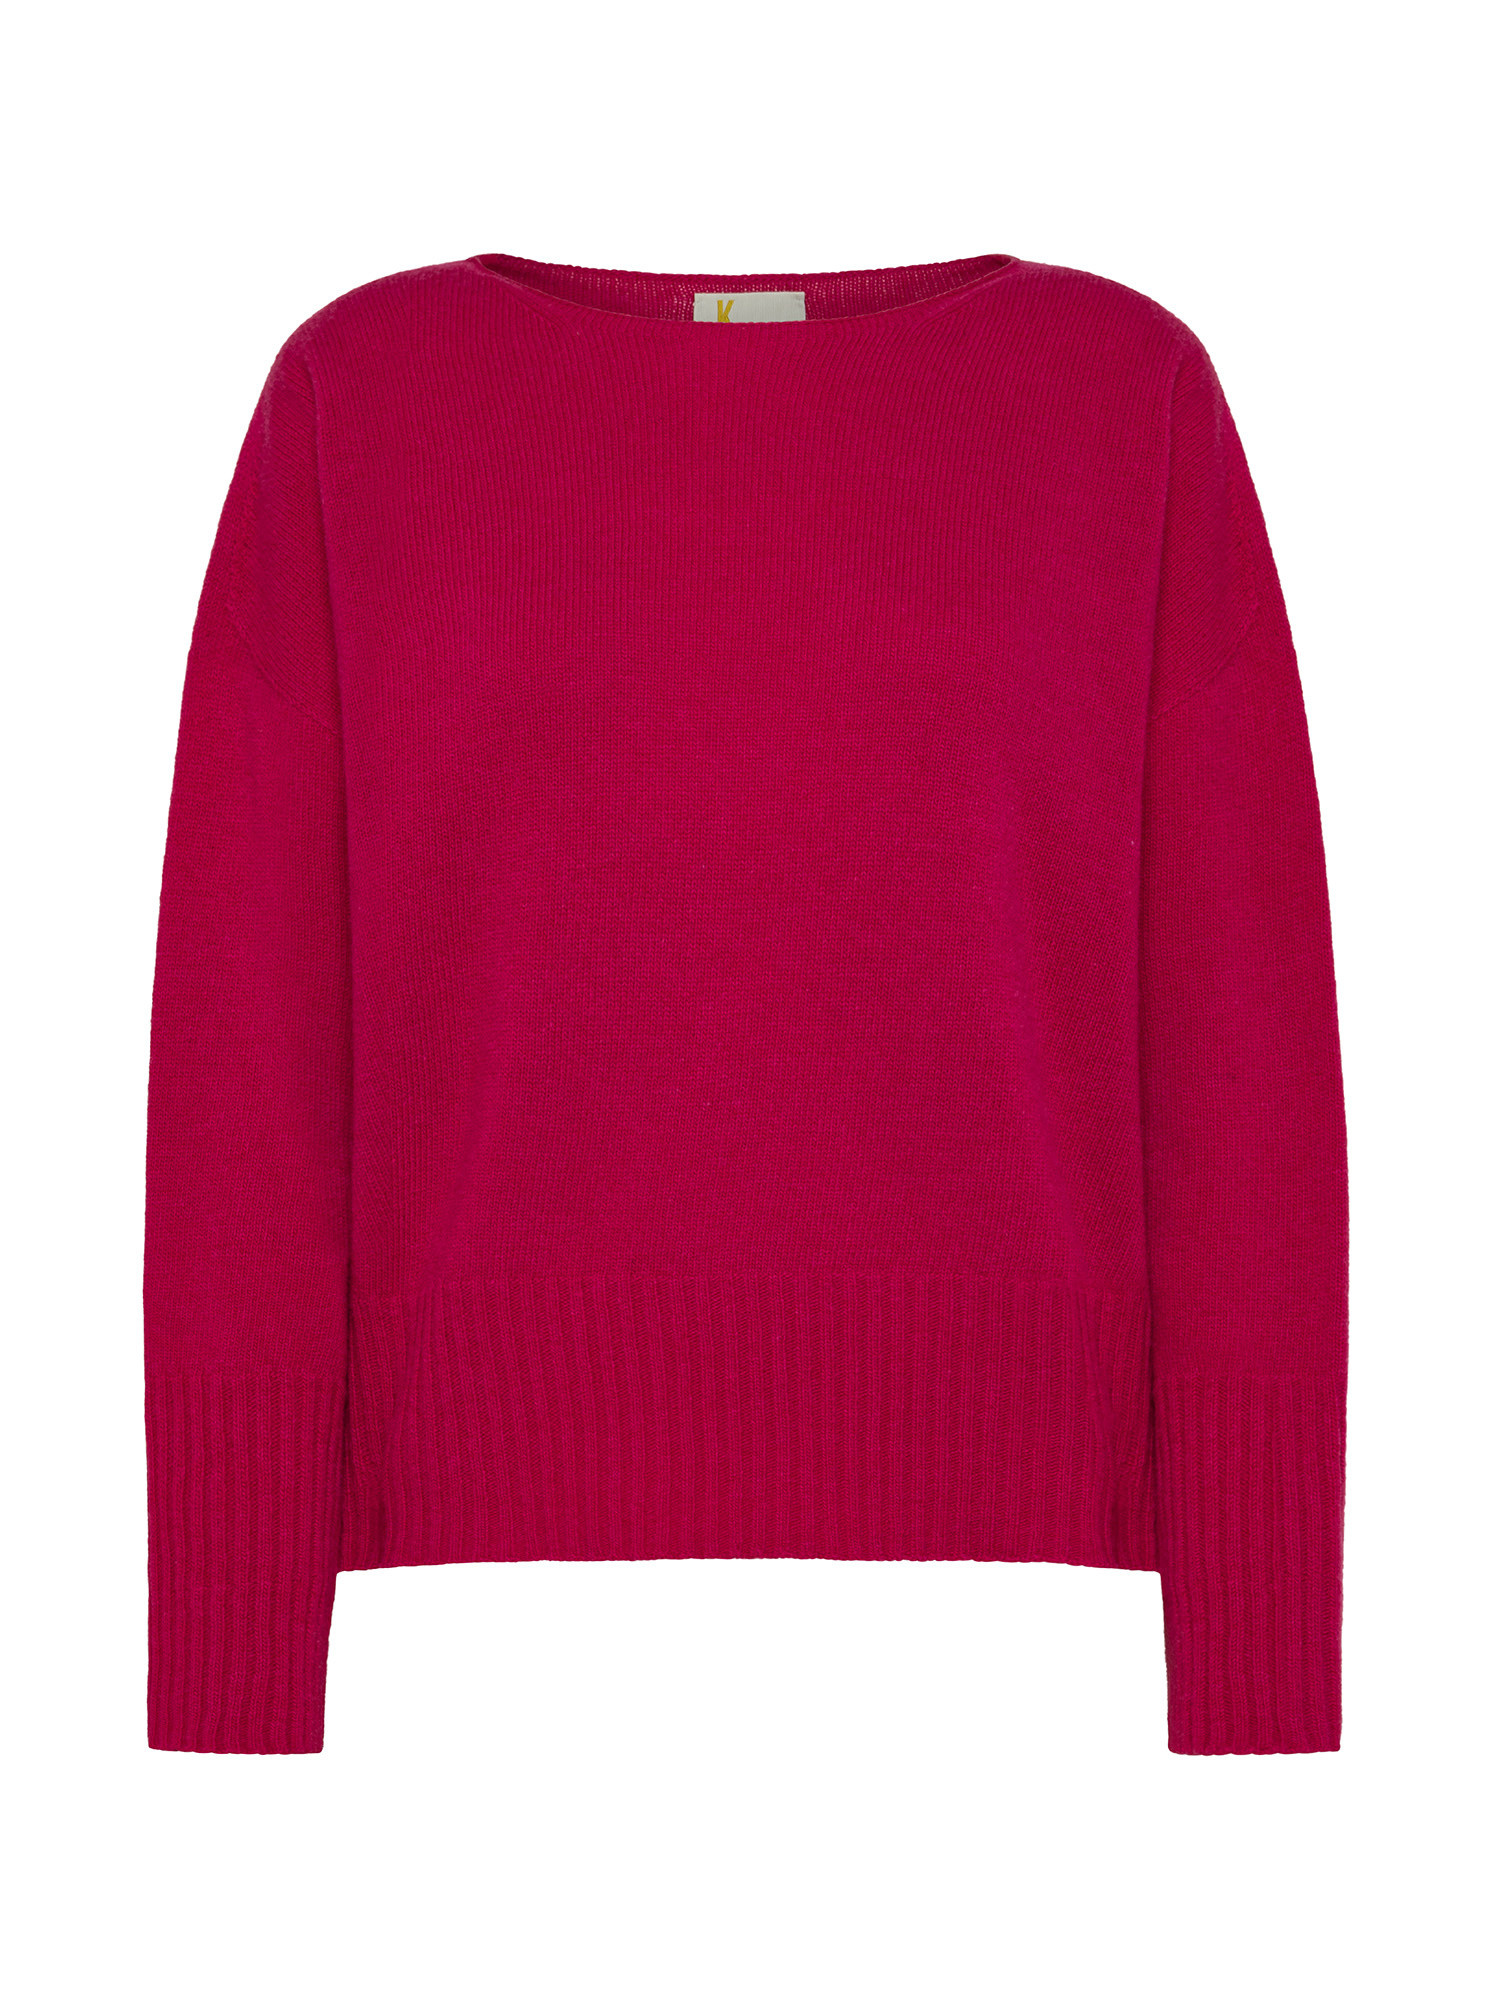 K Collection - Carded wool pullover, Pink Fuchsia, large image number 0